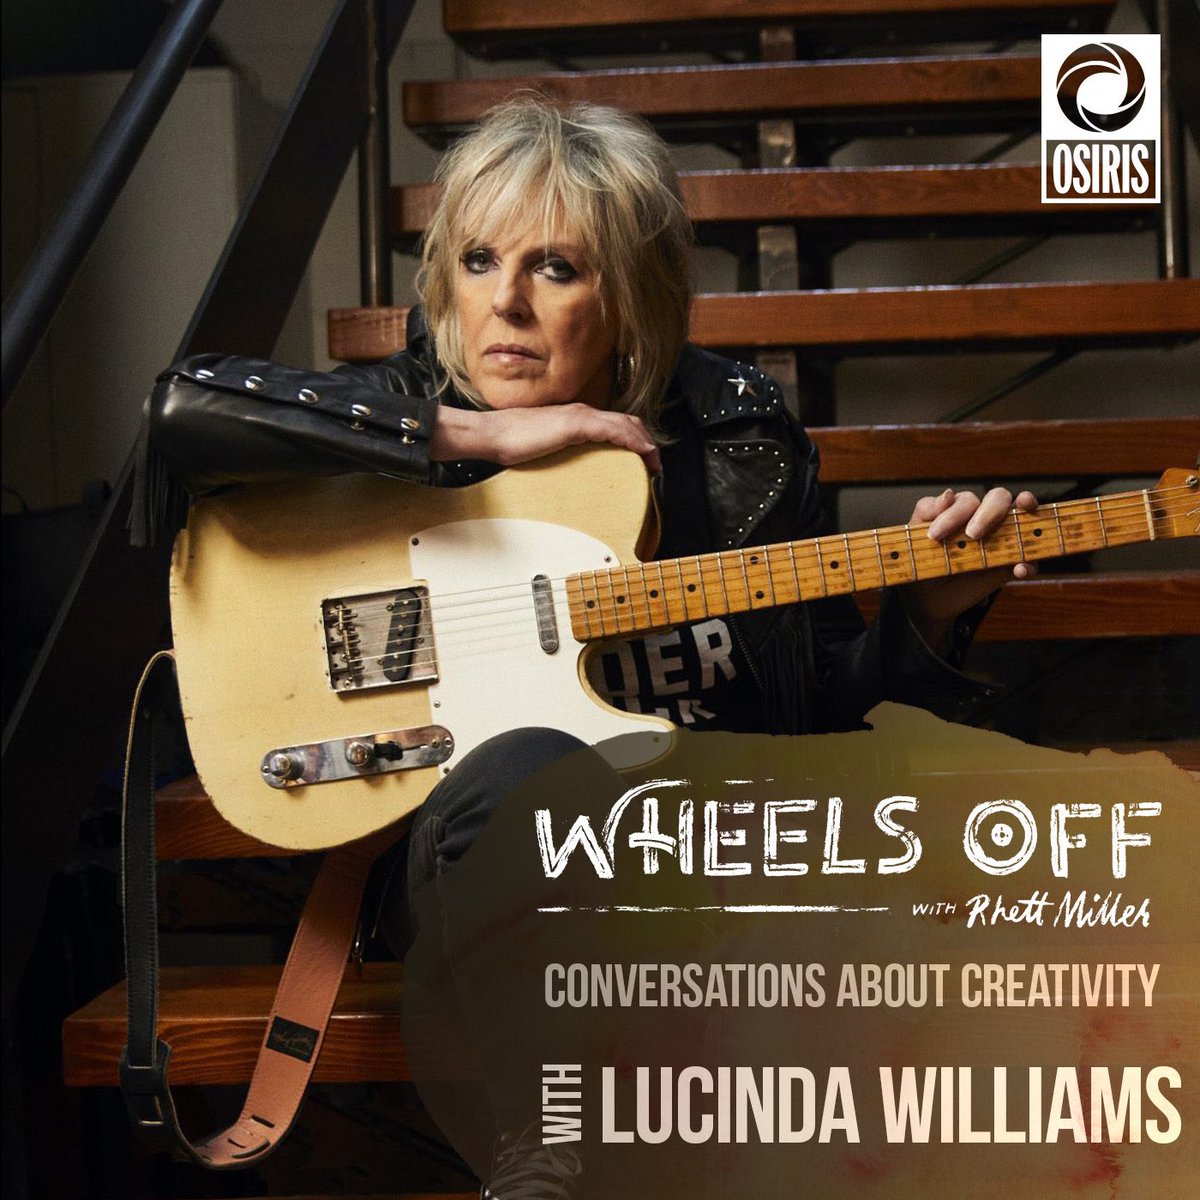 “Don’t be afraid to go to the dark places as an artist.” – Lucinda Williams @HappyWoman9 is a special person and our conversation for #WheelsOff makes that clear. To my mind she’s the perfect combination of delicate poet and snarling rock ‘n’ roller.